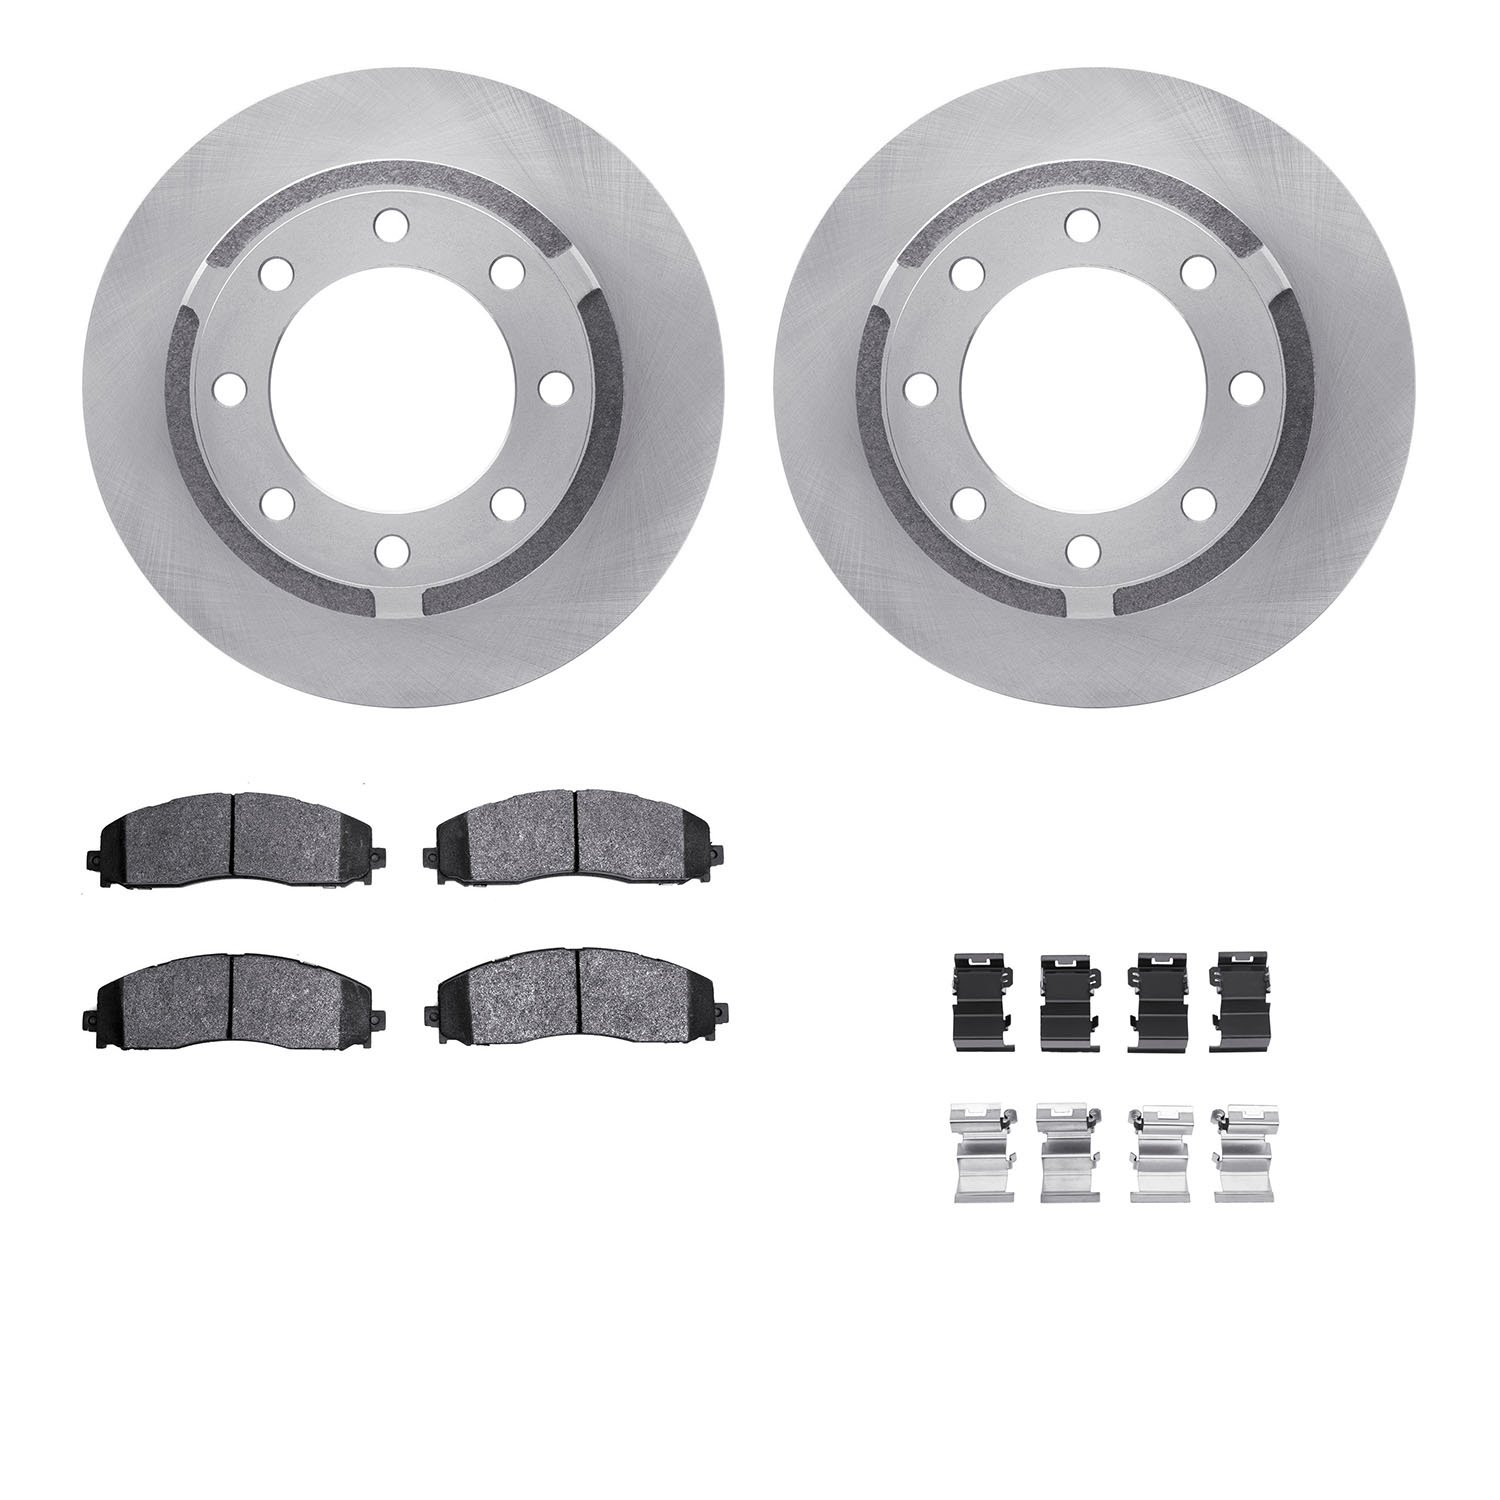 6412-54302 Brake Rotors with Ultimate-Duty Brake Pads Kit & Hardware, Fits Select Ford/Lincoln/Mercury/Mazda, Position: Rear